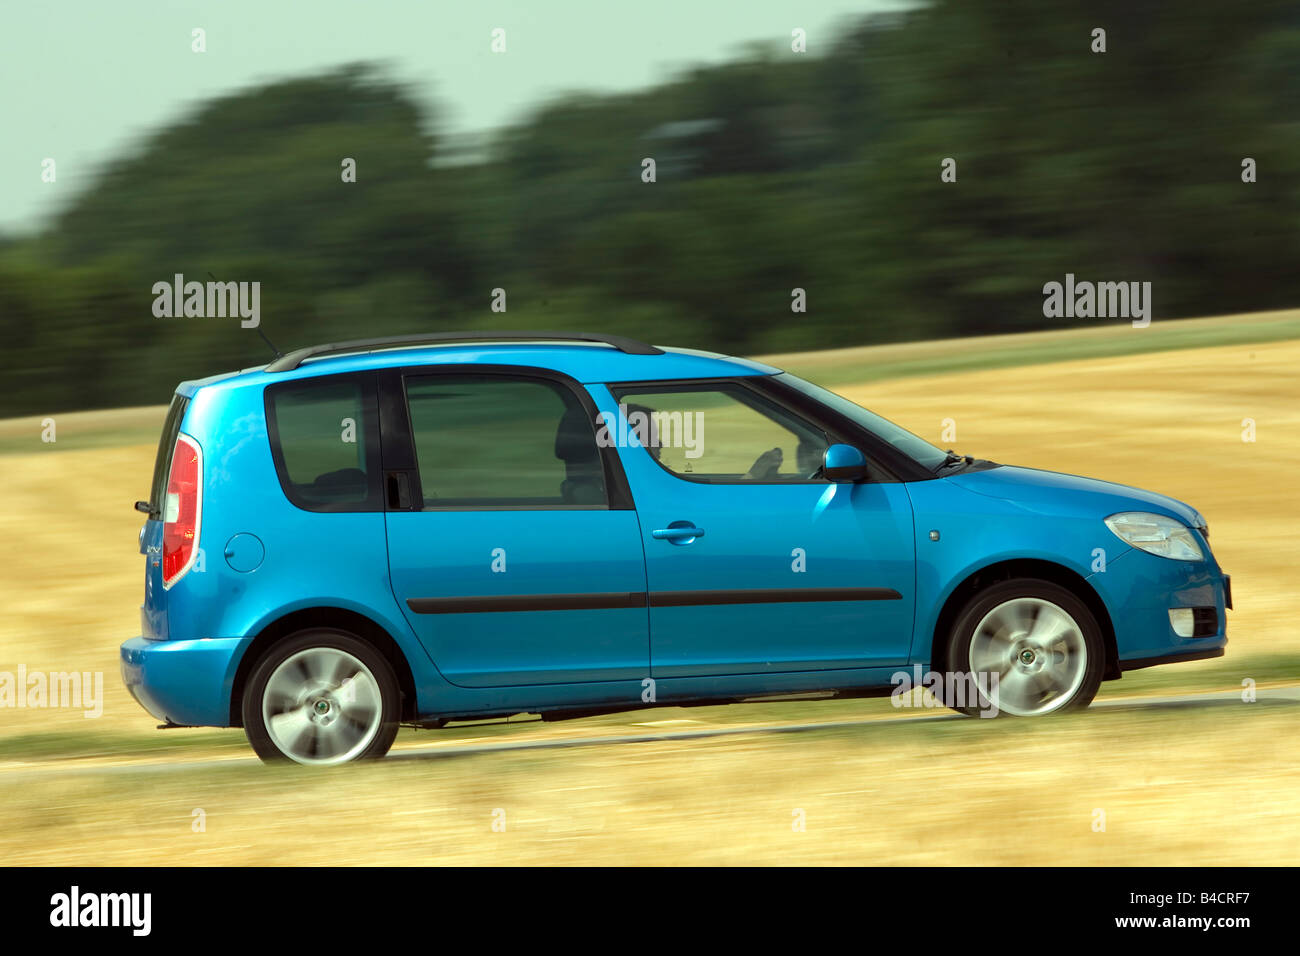 Skoda Roomster 1.9 TDI, model year 2006-, blue moving, side view, country road Stock Photo